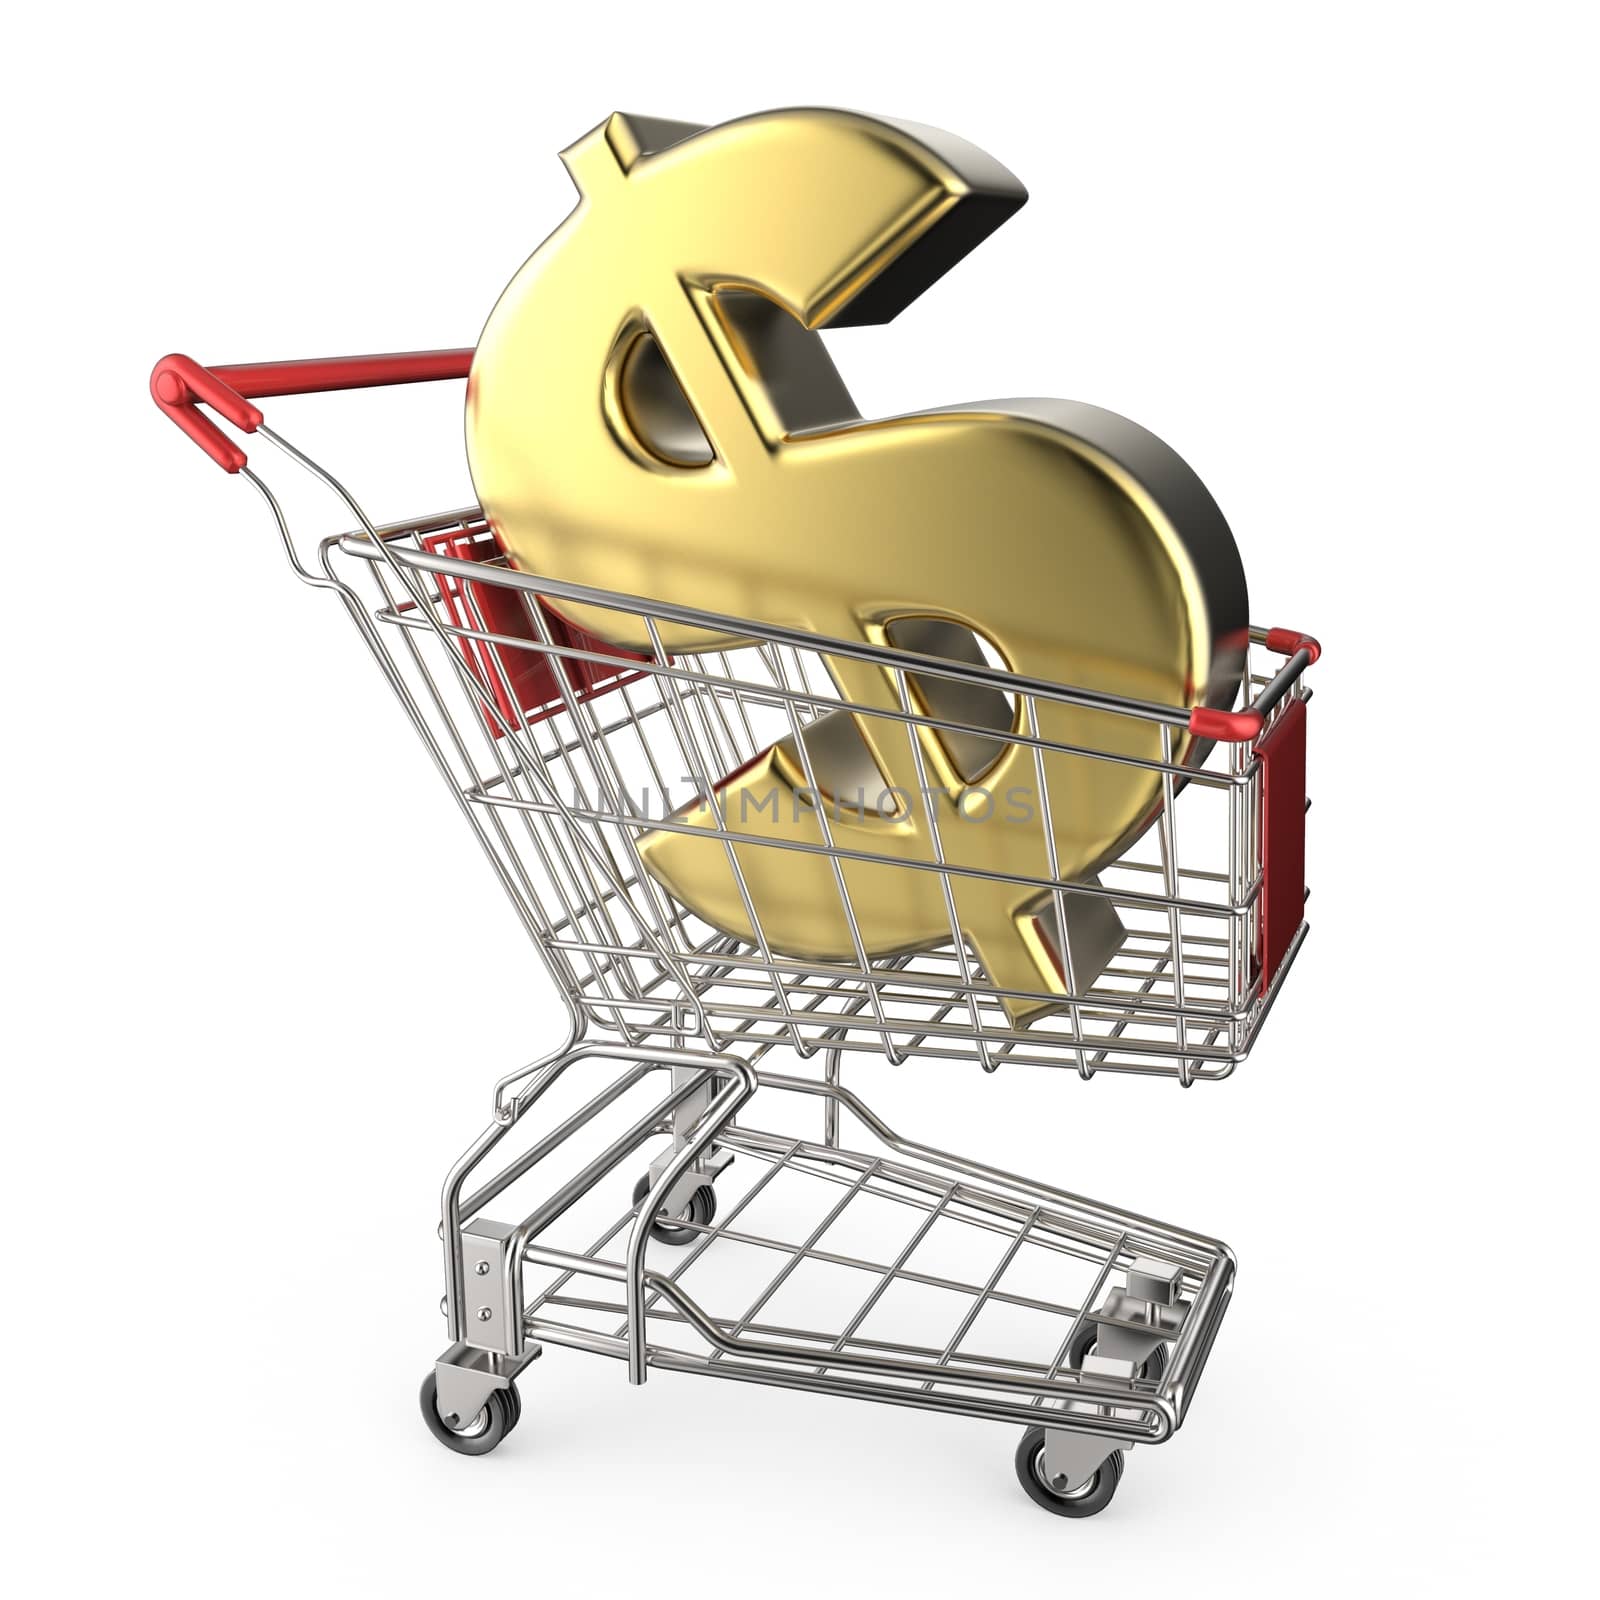 Red shopping cart with golden dollar currency sign 3D render illustration isolated on white background